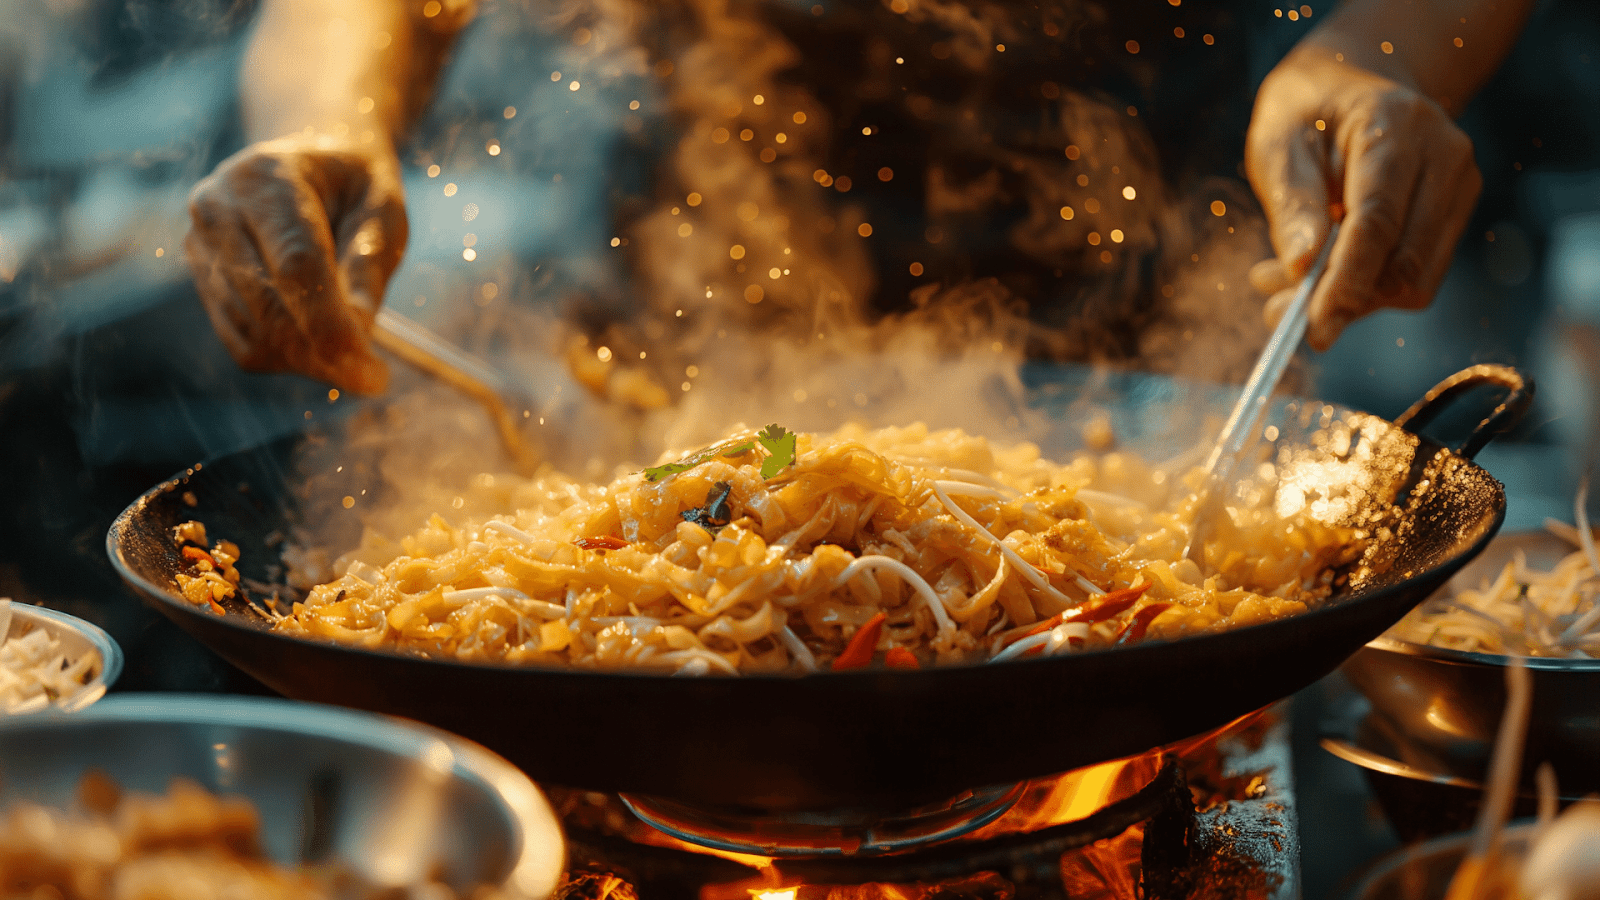 The sizzle of Pad Thai in a bustling Bangkok (Thailand) street market